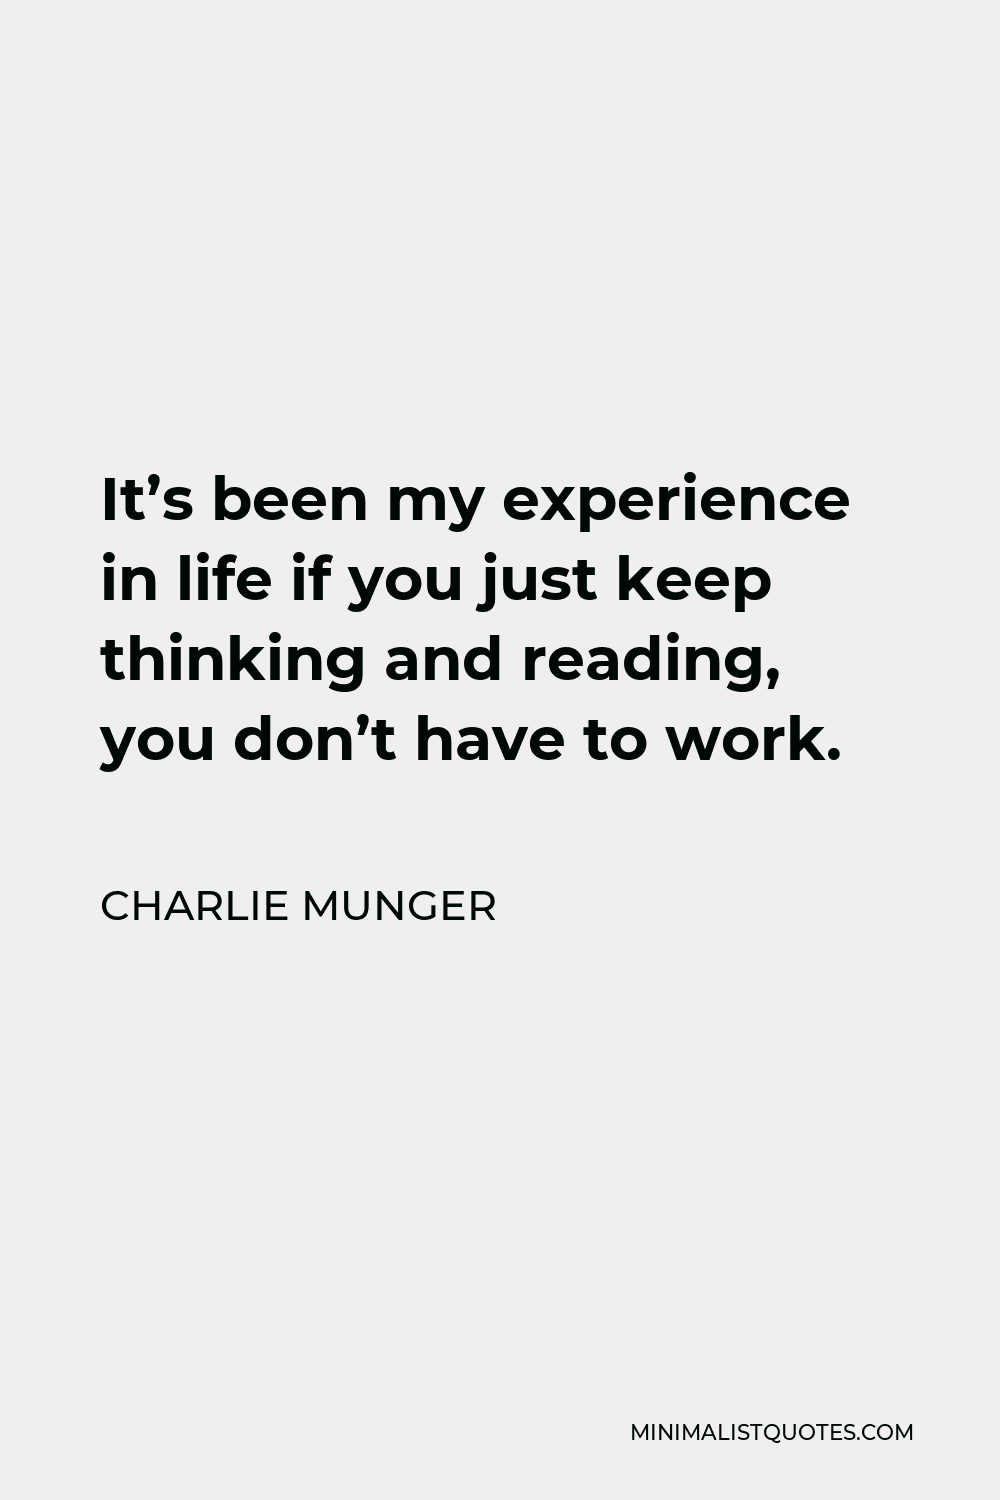 Charlie Munger Quote - It’s been my experience in life if you just keep thinking and reading, you don’t have to work.